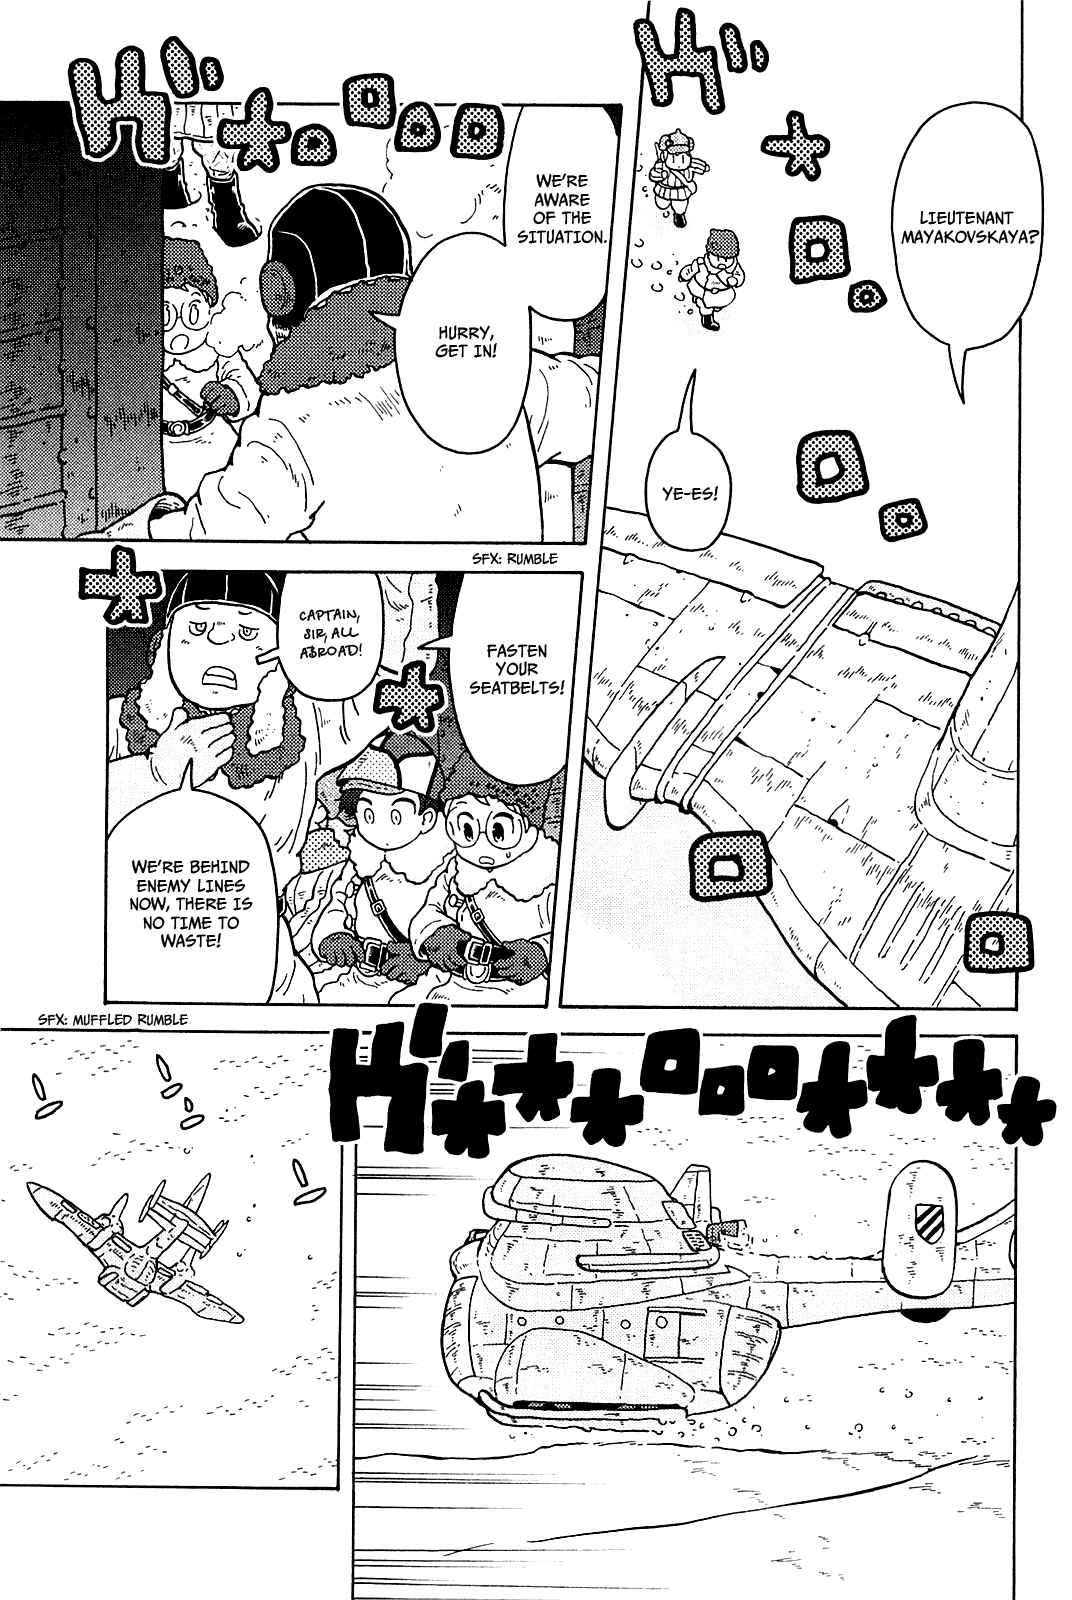 Guns and Stamps Vol. 3 Ch. 17 It Was My First Time